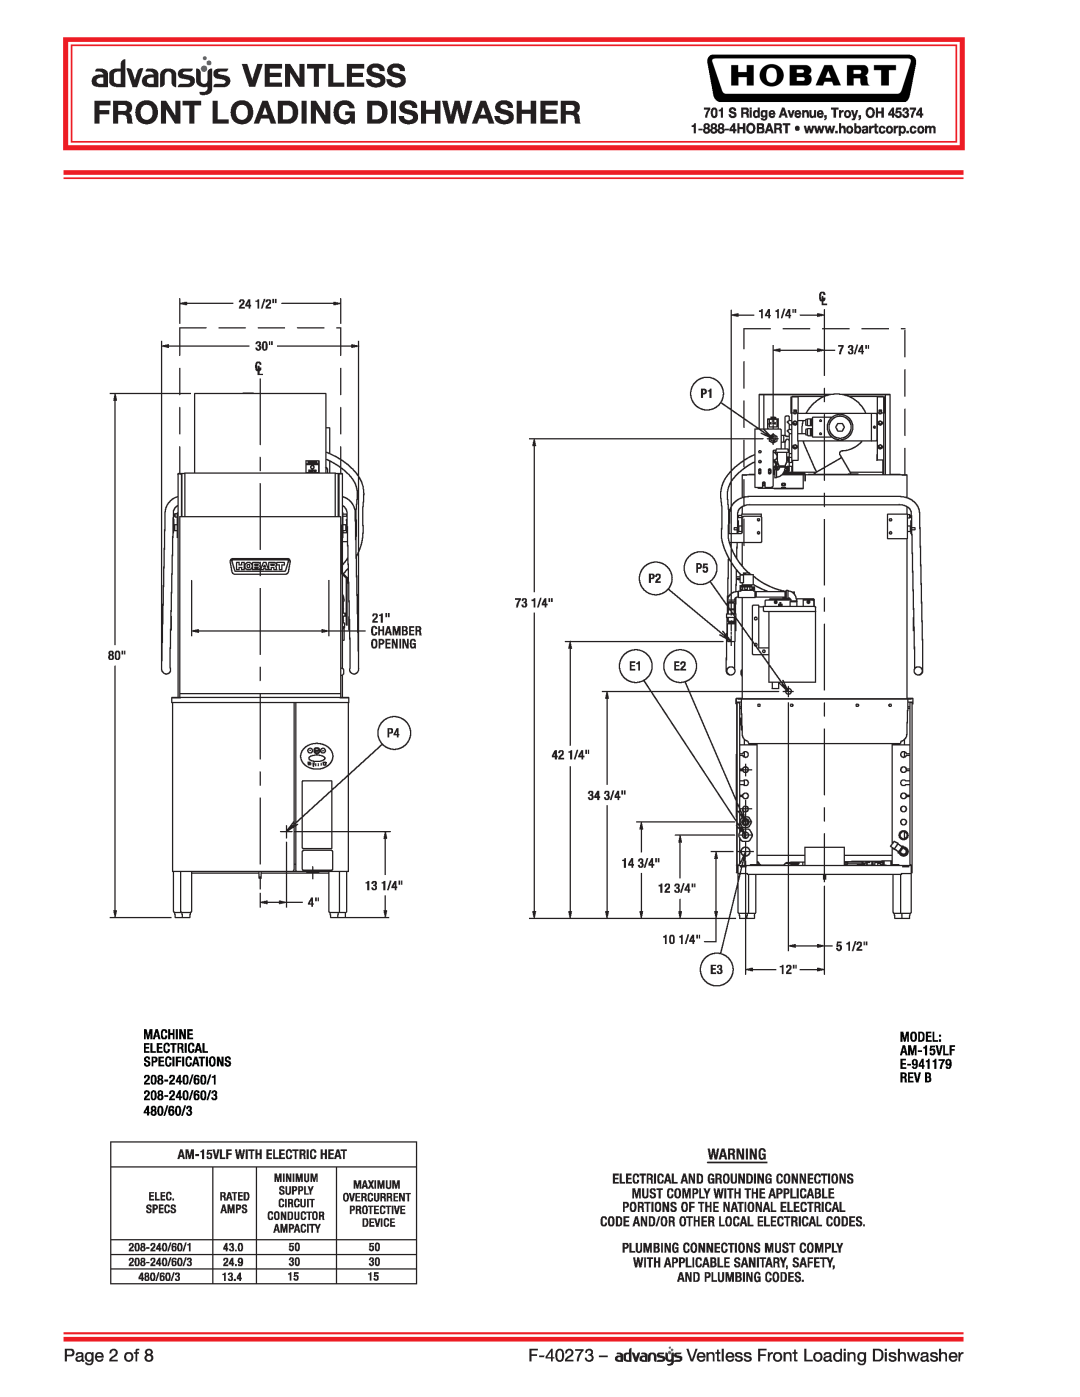 Hobart AM15VLF dimensions Ventless Front Loading Dishwasher, Page 2 of, F-40273, S Ridge Avenue, Troy, OH 